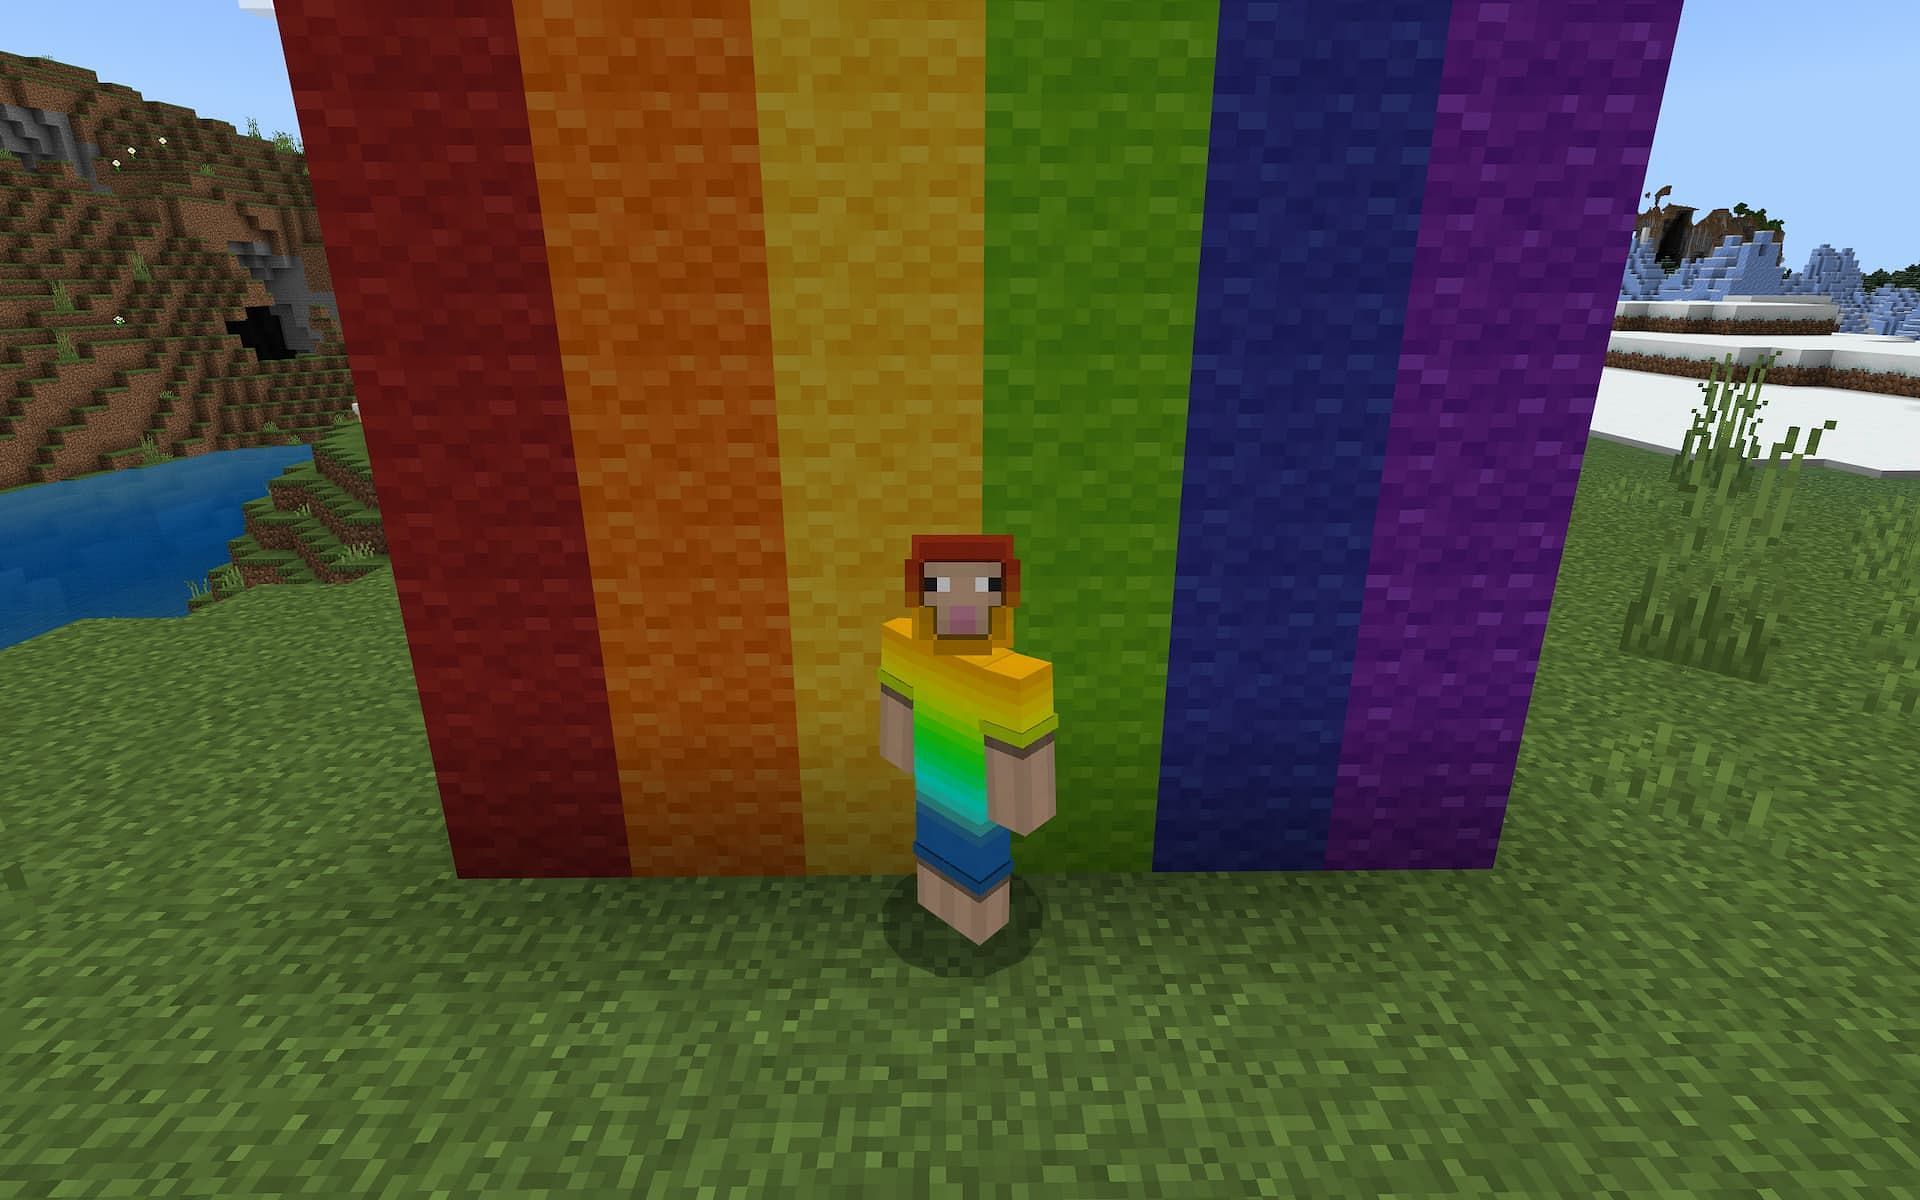 A rainbow sheep avatar stands in front of a rainbow made out of colored wool in Minecraft.